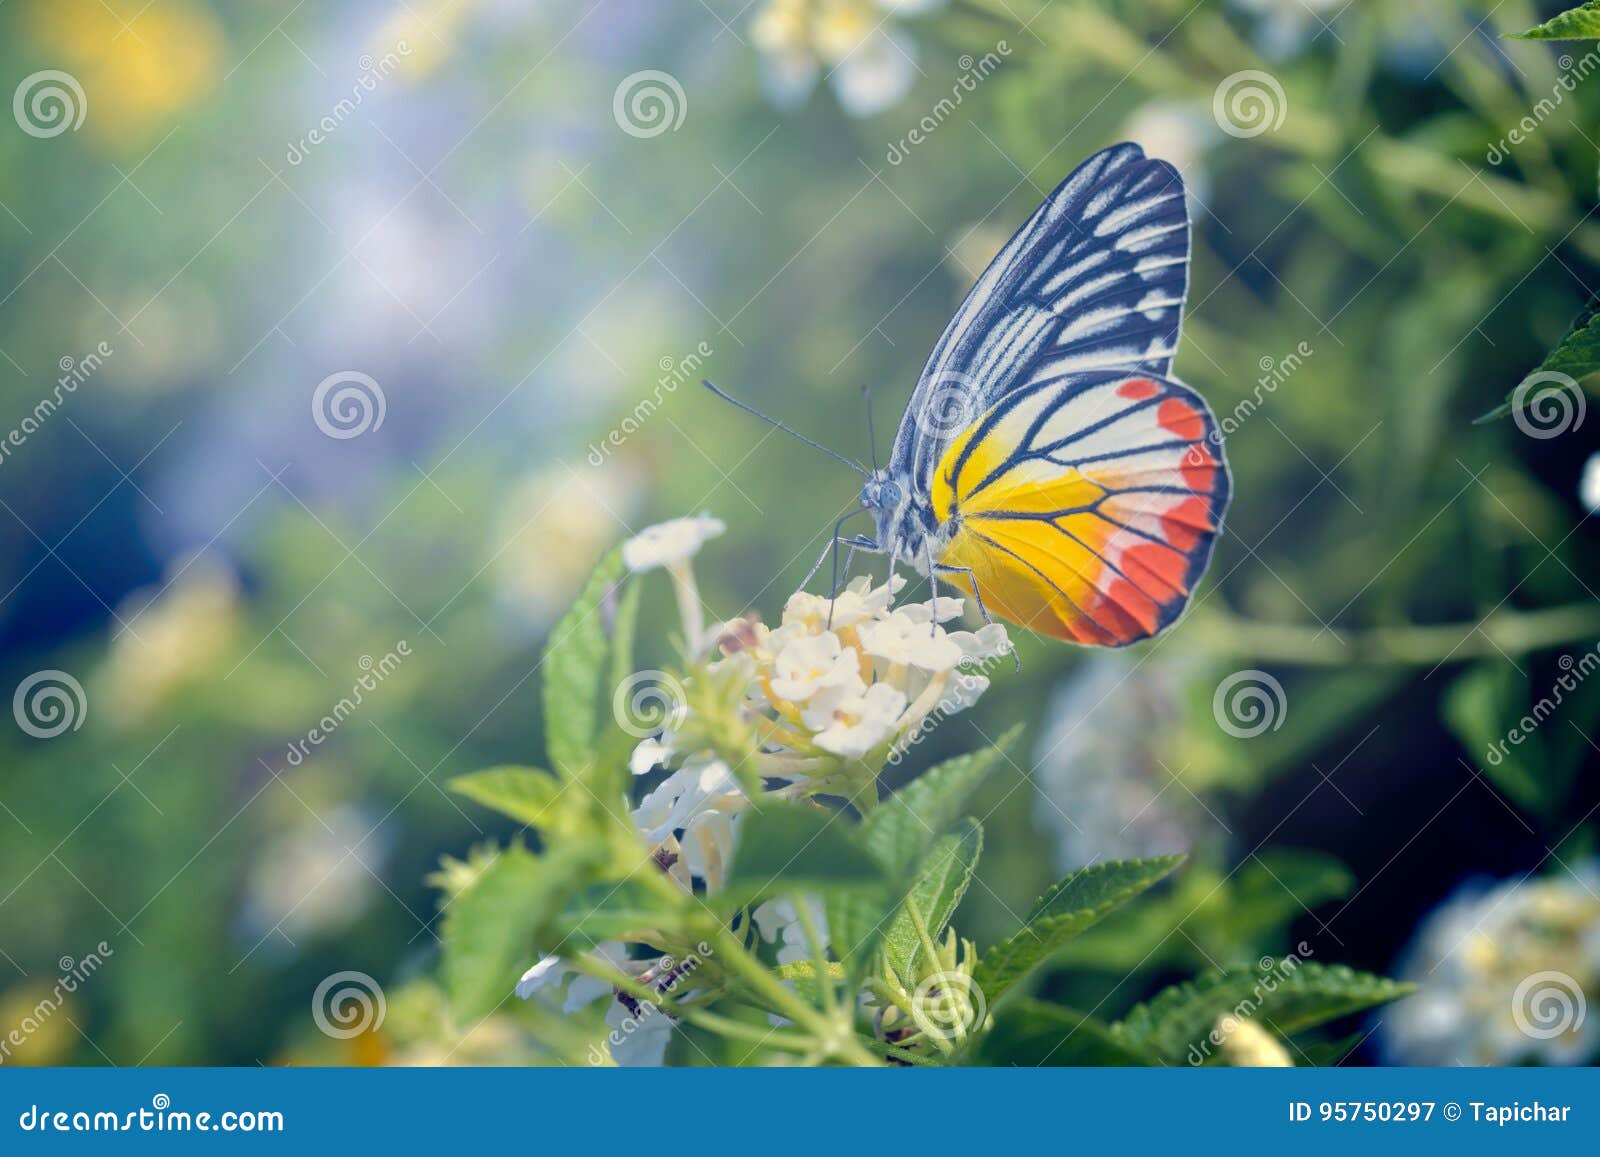 Painted Jezebel Butterfly And Flowers Stock Image Image Of Painted Green 95750297